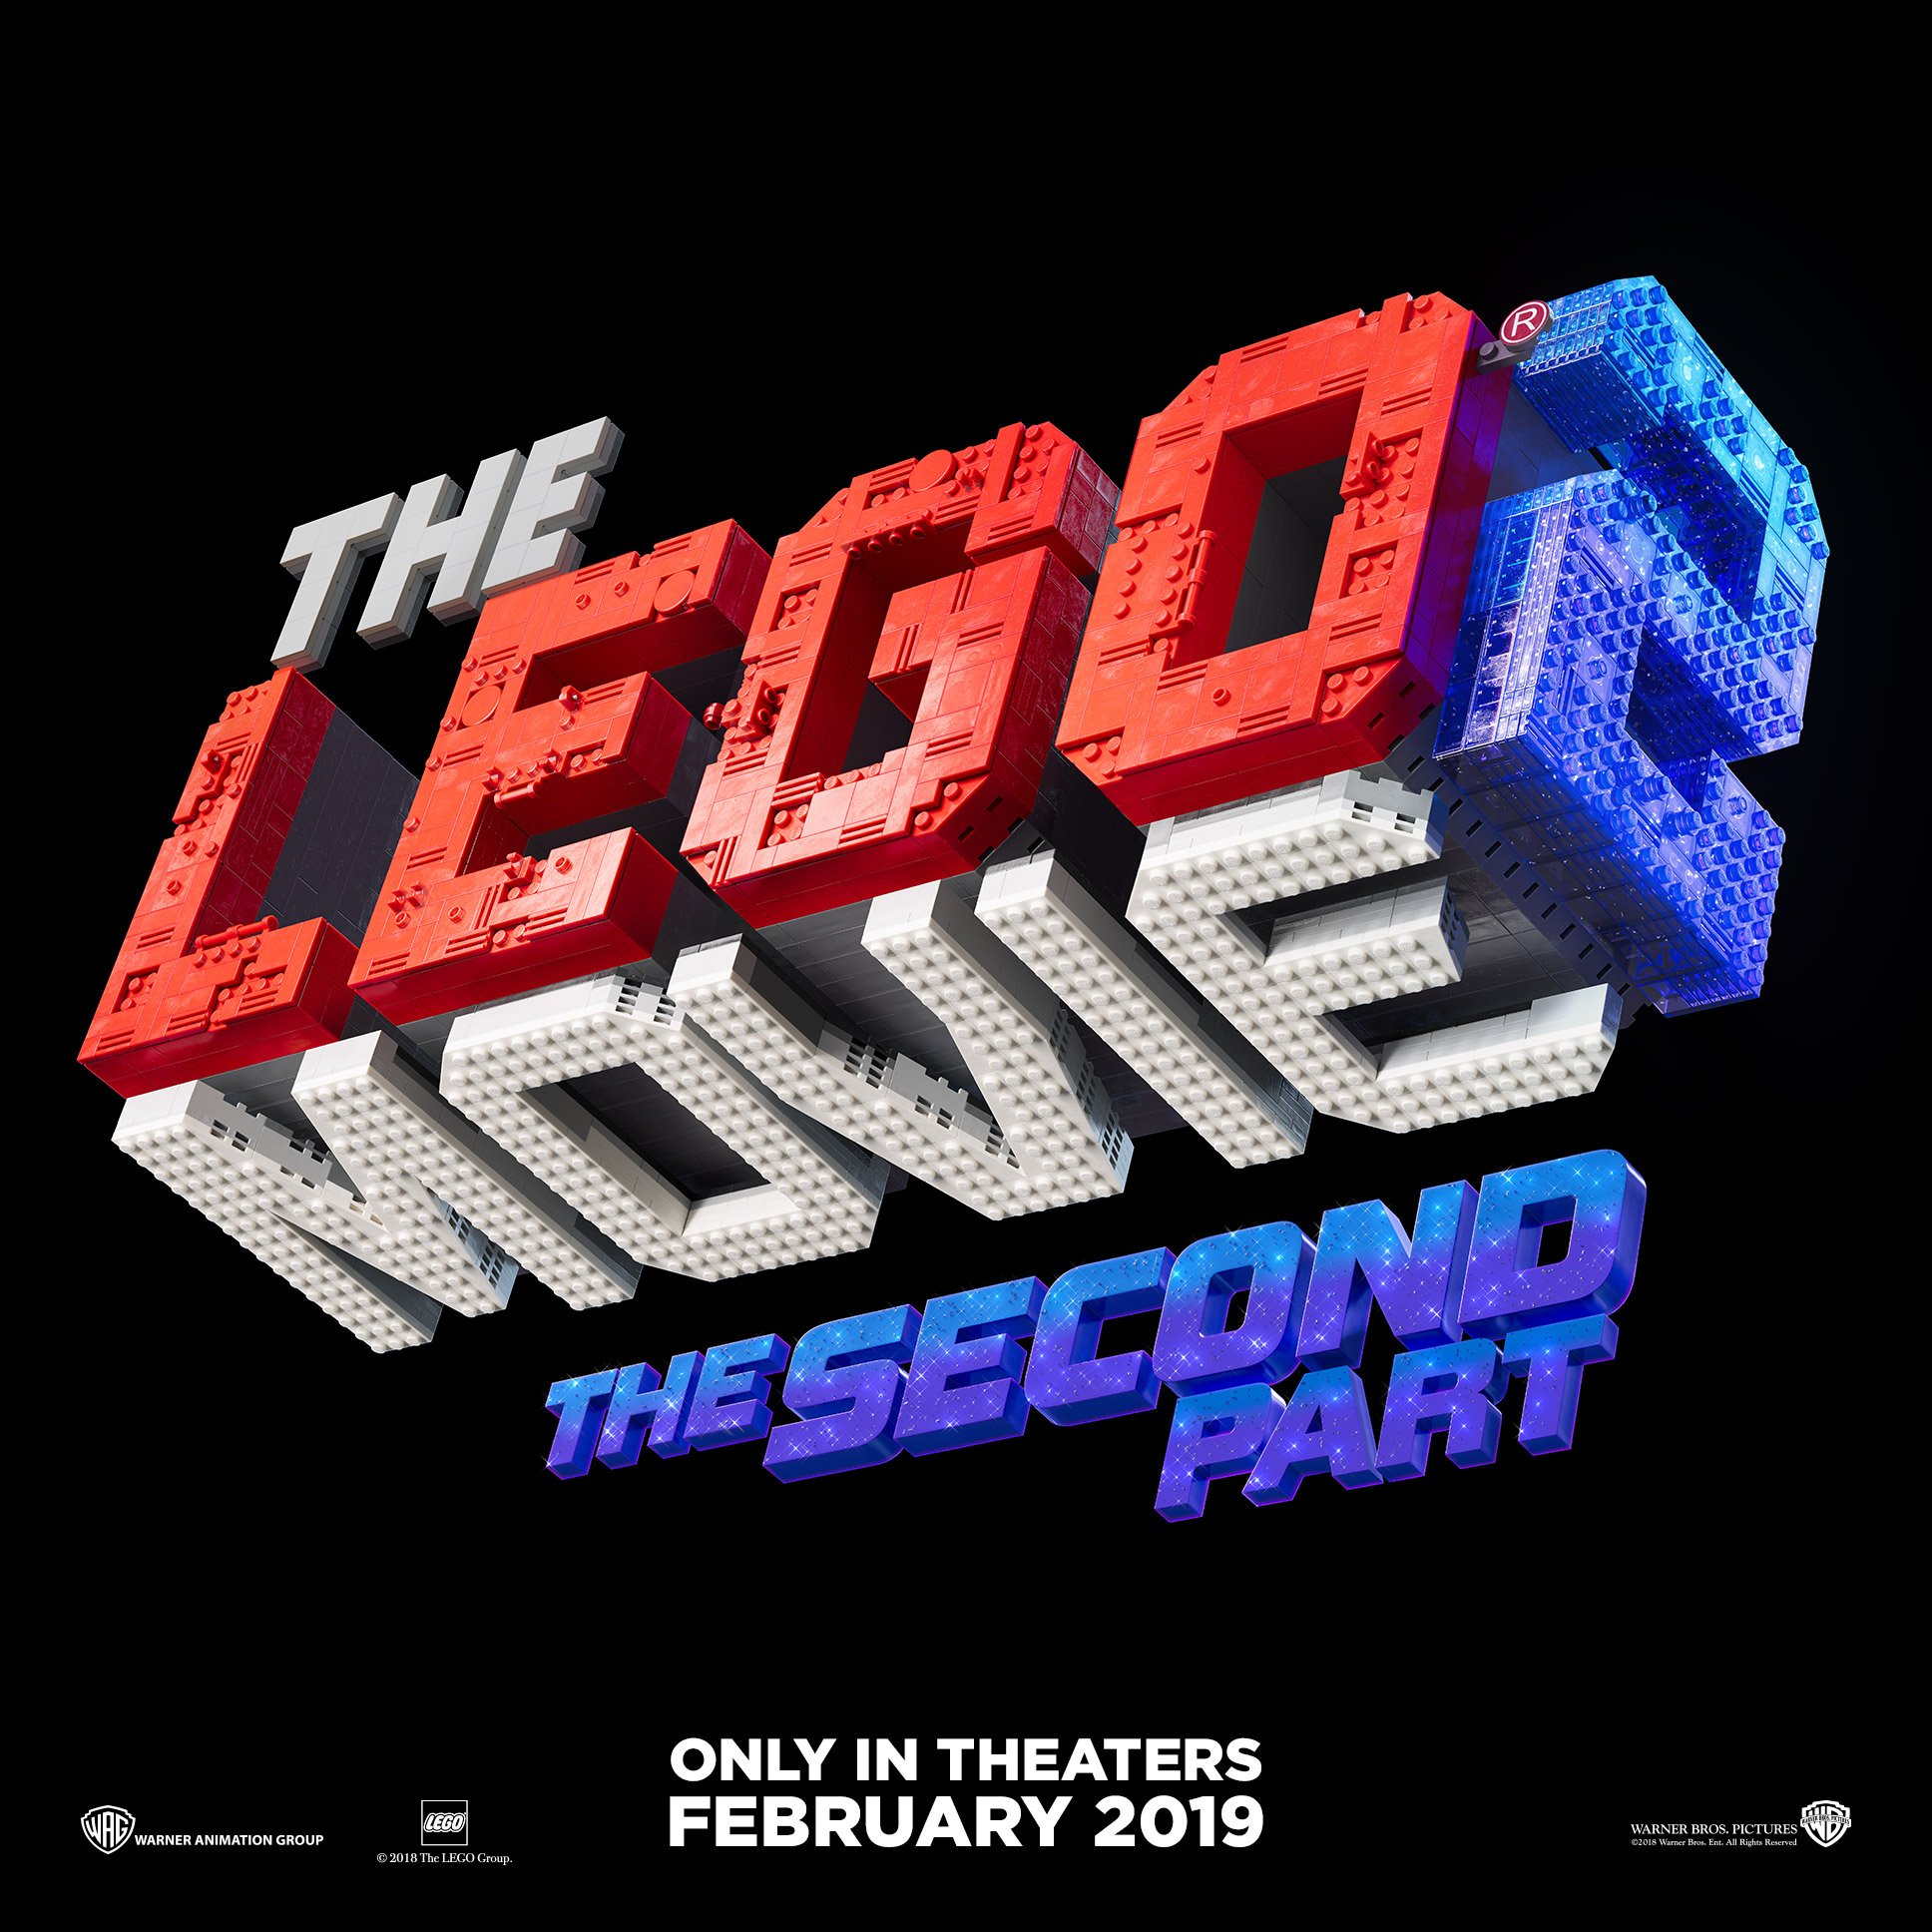 LEGO Go Warner Bros. to Pictures